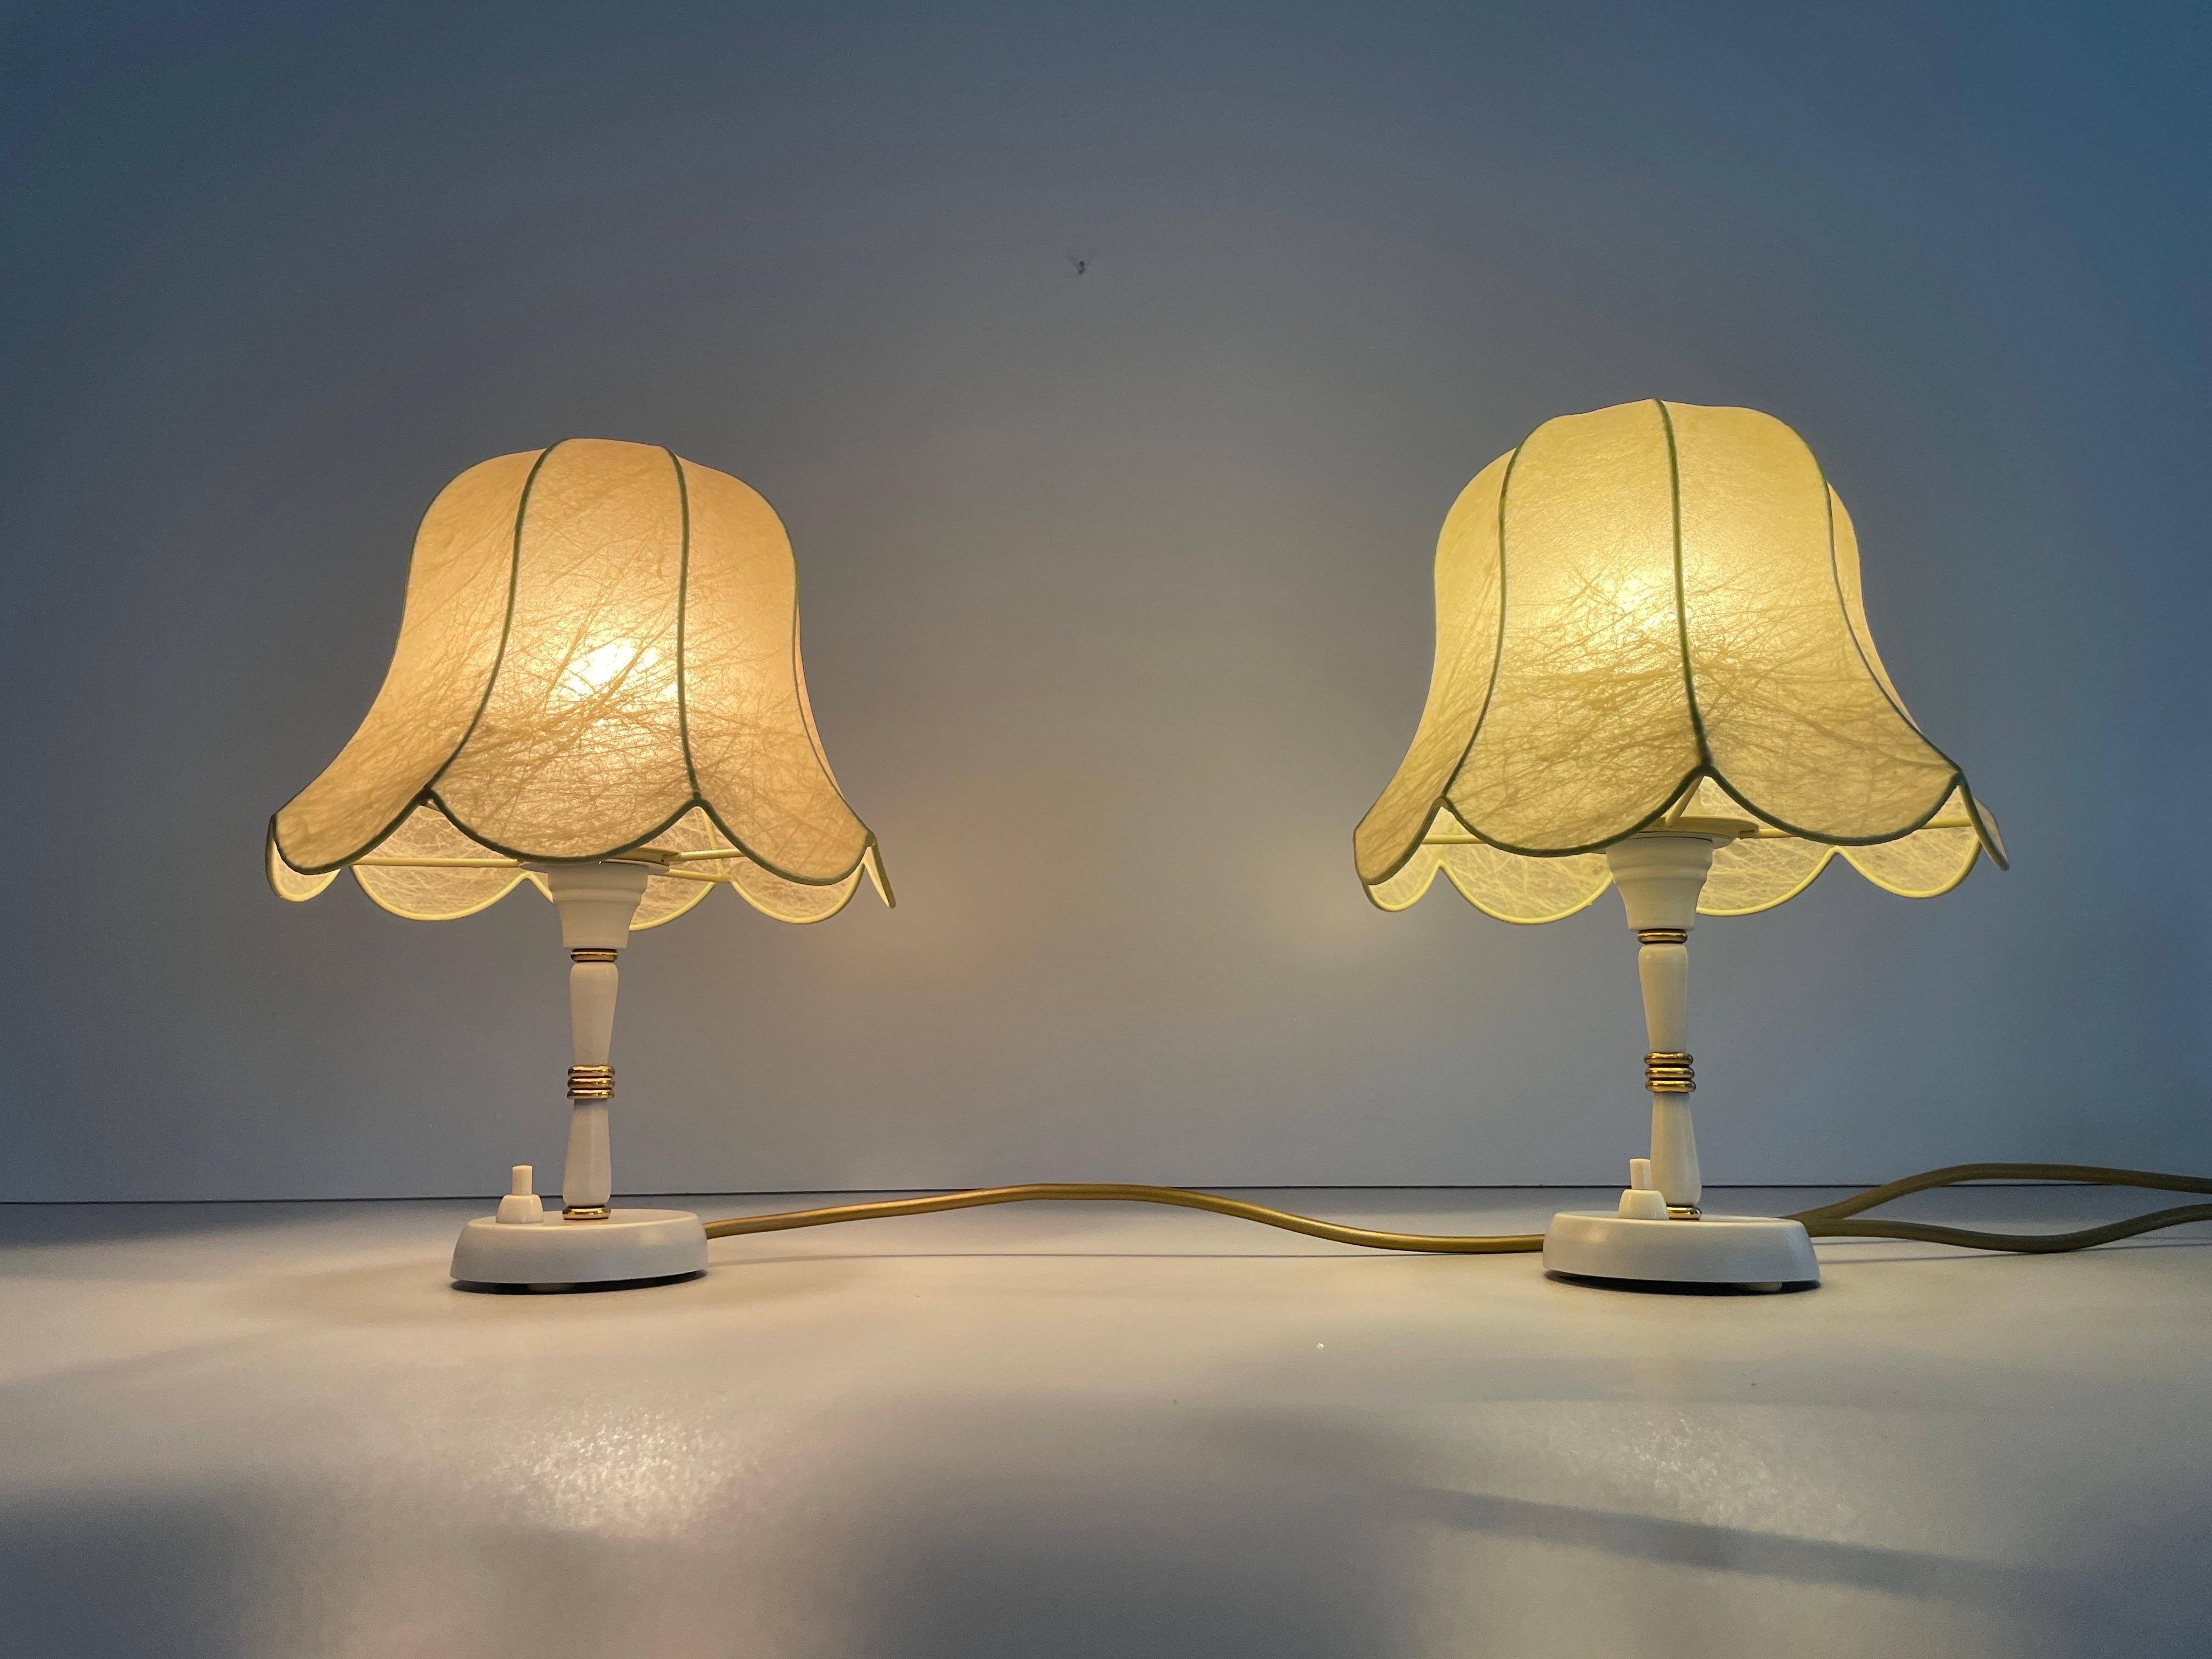 Cocoon Shade Metal Body Pair of Bedside Lamps by GOLDKANT, 1970s, Germany For Sale 4